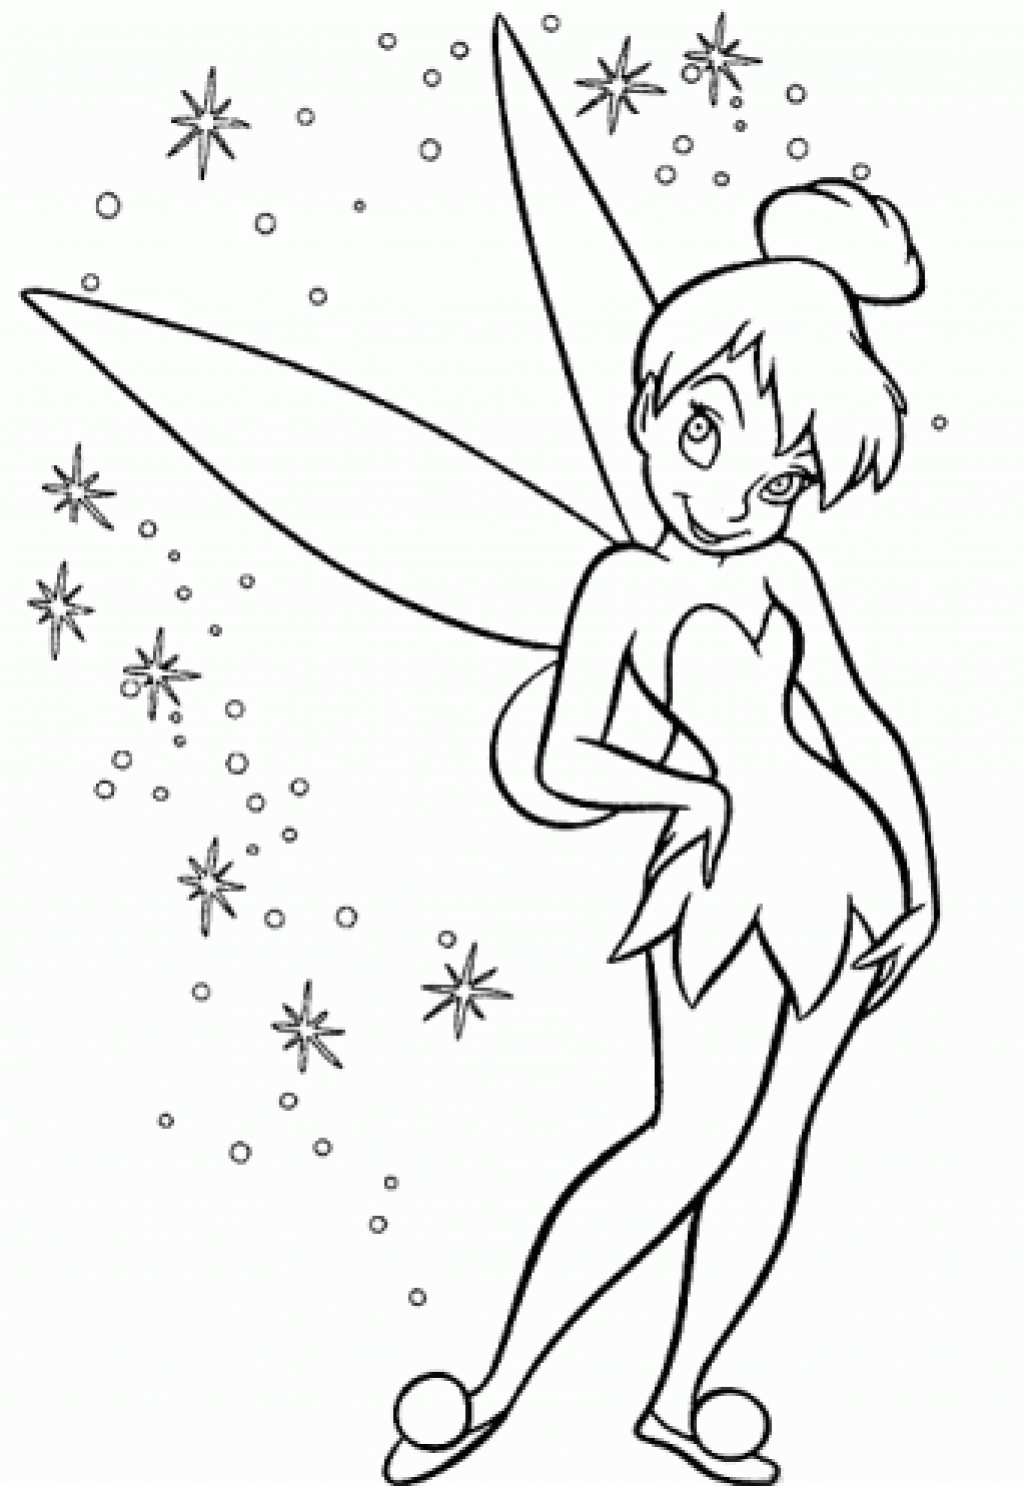 Free Printable Tinkerbell Coloring Pages For Kids | Páginas para ...